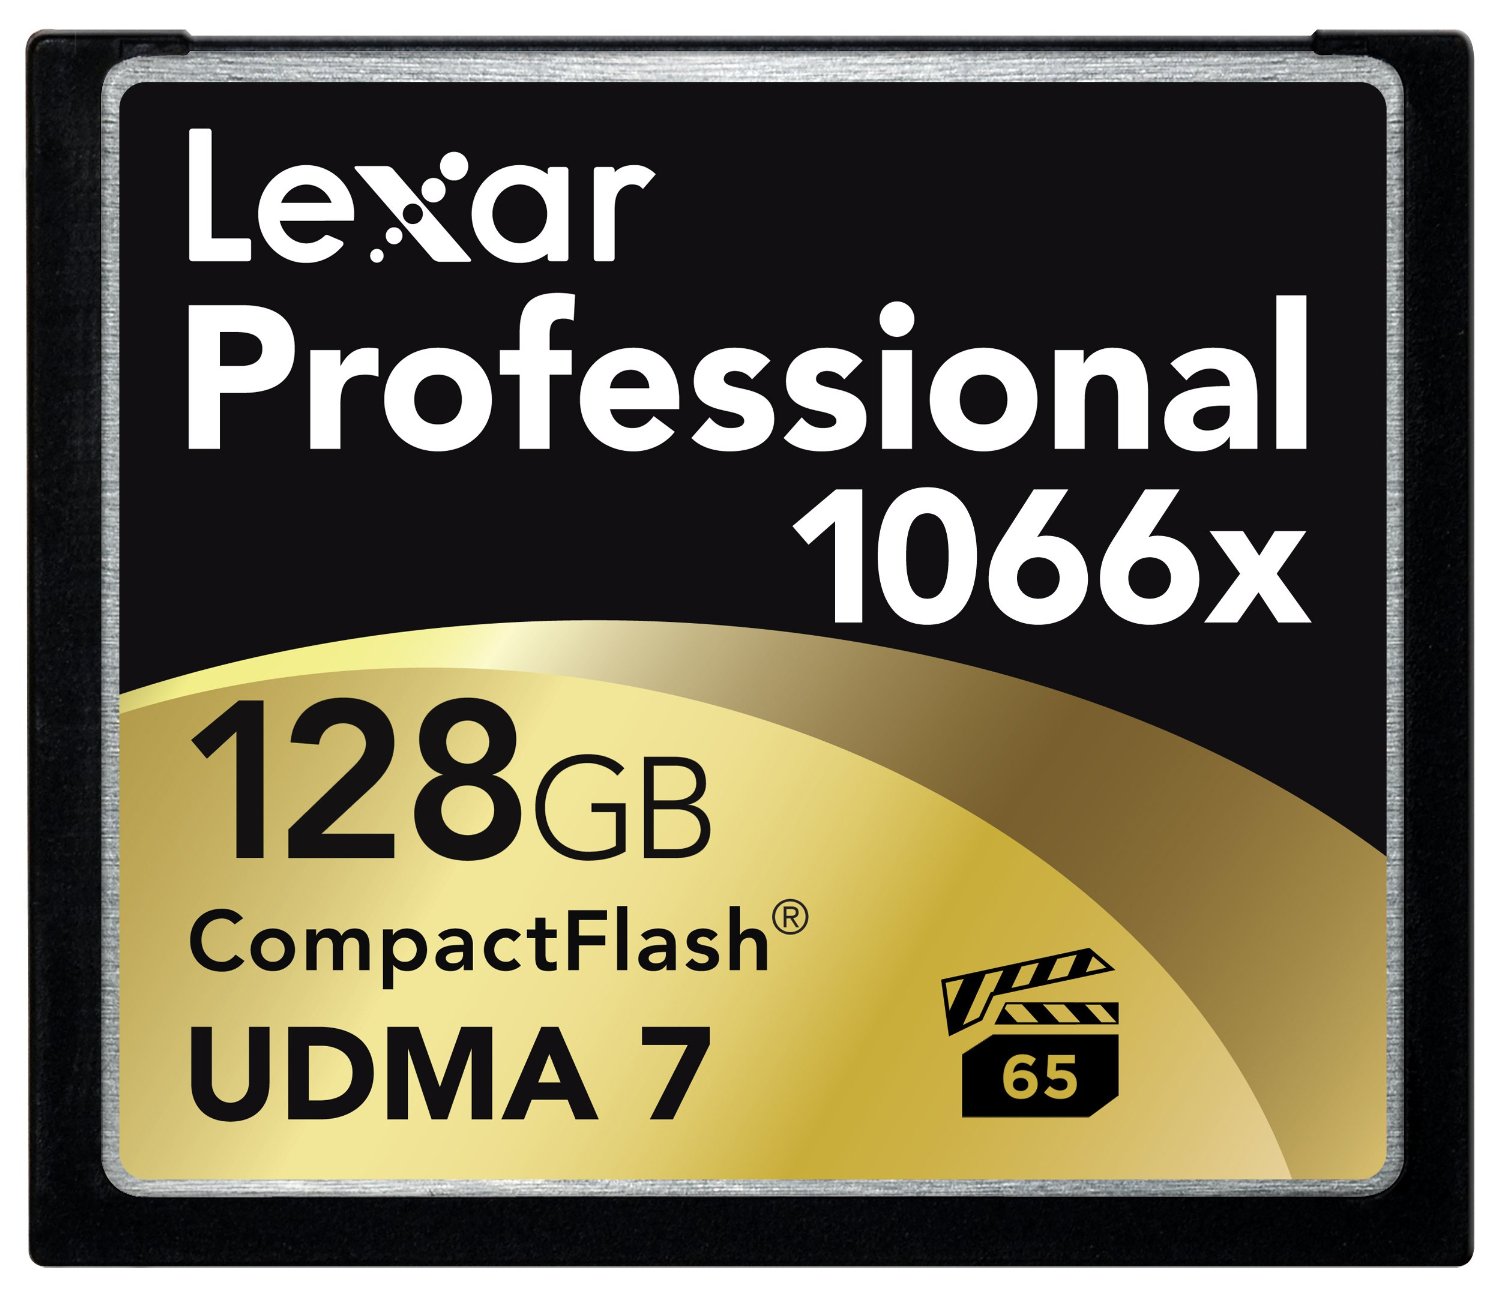 Lexar Professional 1066x 128GB VPG-65 CompactFlash card (Up to 160MB/s Read) w/Free Image Rescue 5 Software LCF128CRBNA1066